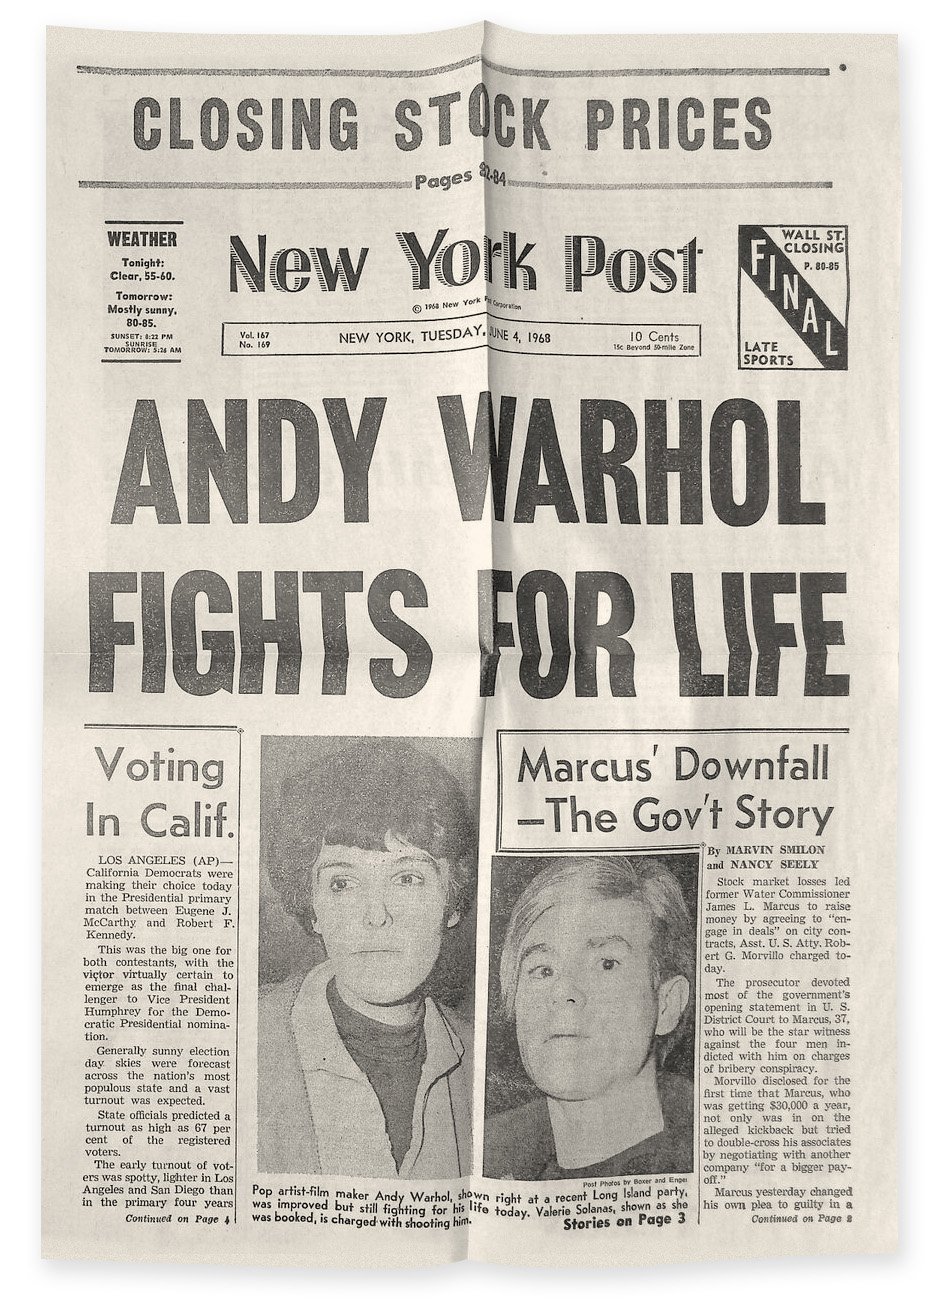 Warhol Fights for Life Front Page 3.jpg